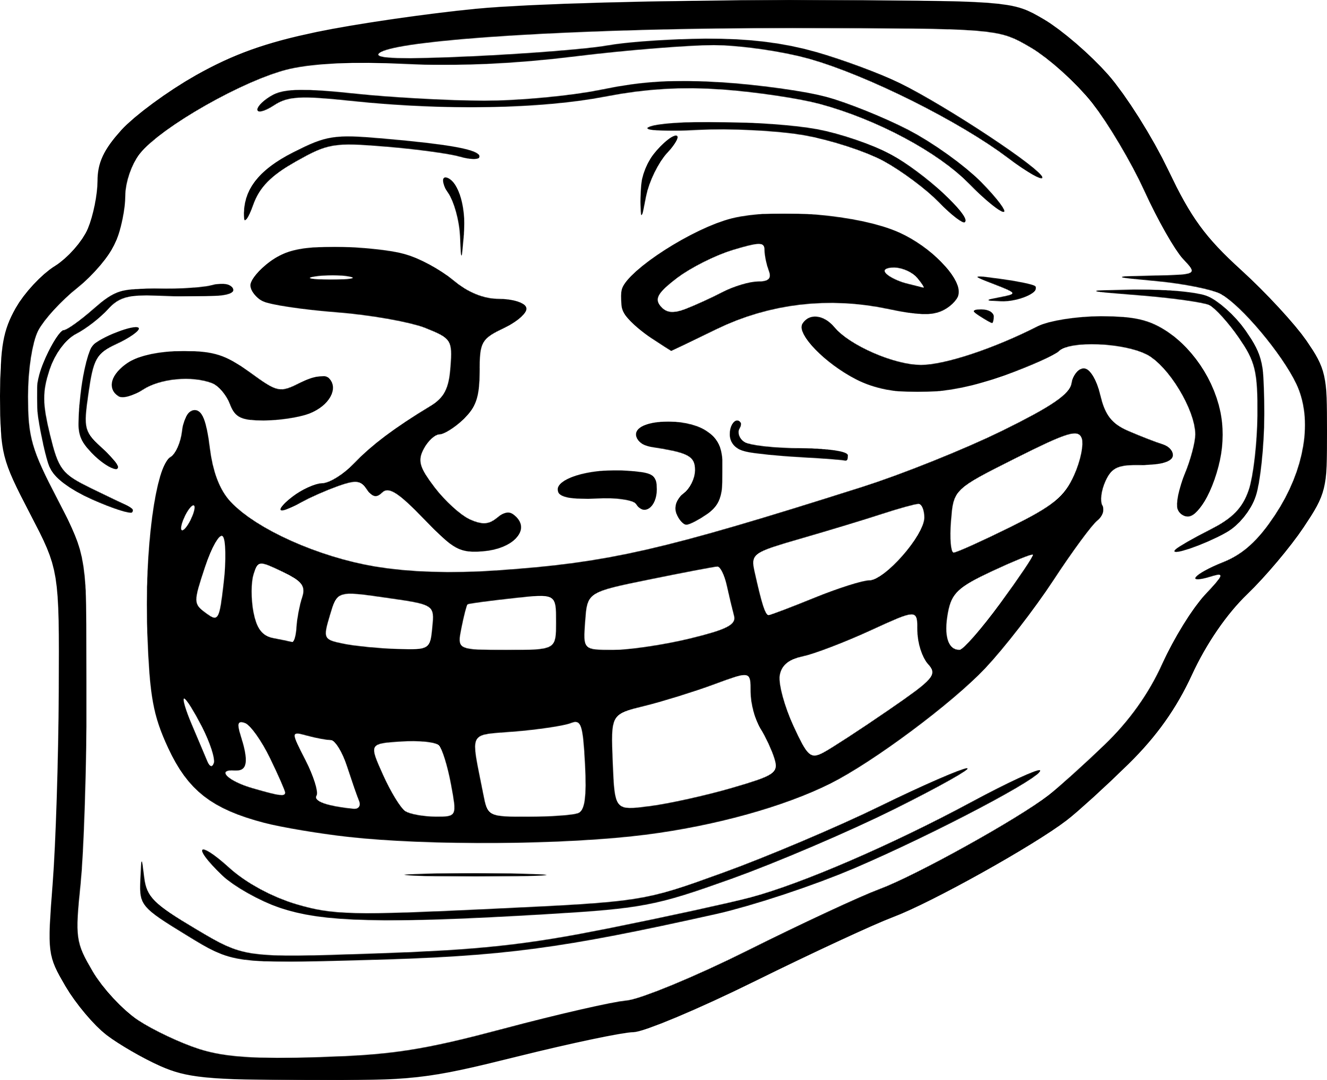 Find hd Troll Face, HD Png Download. To search and download more